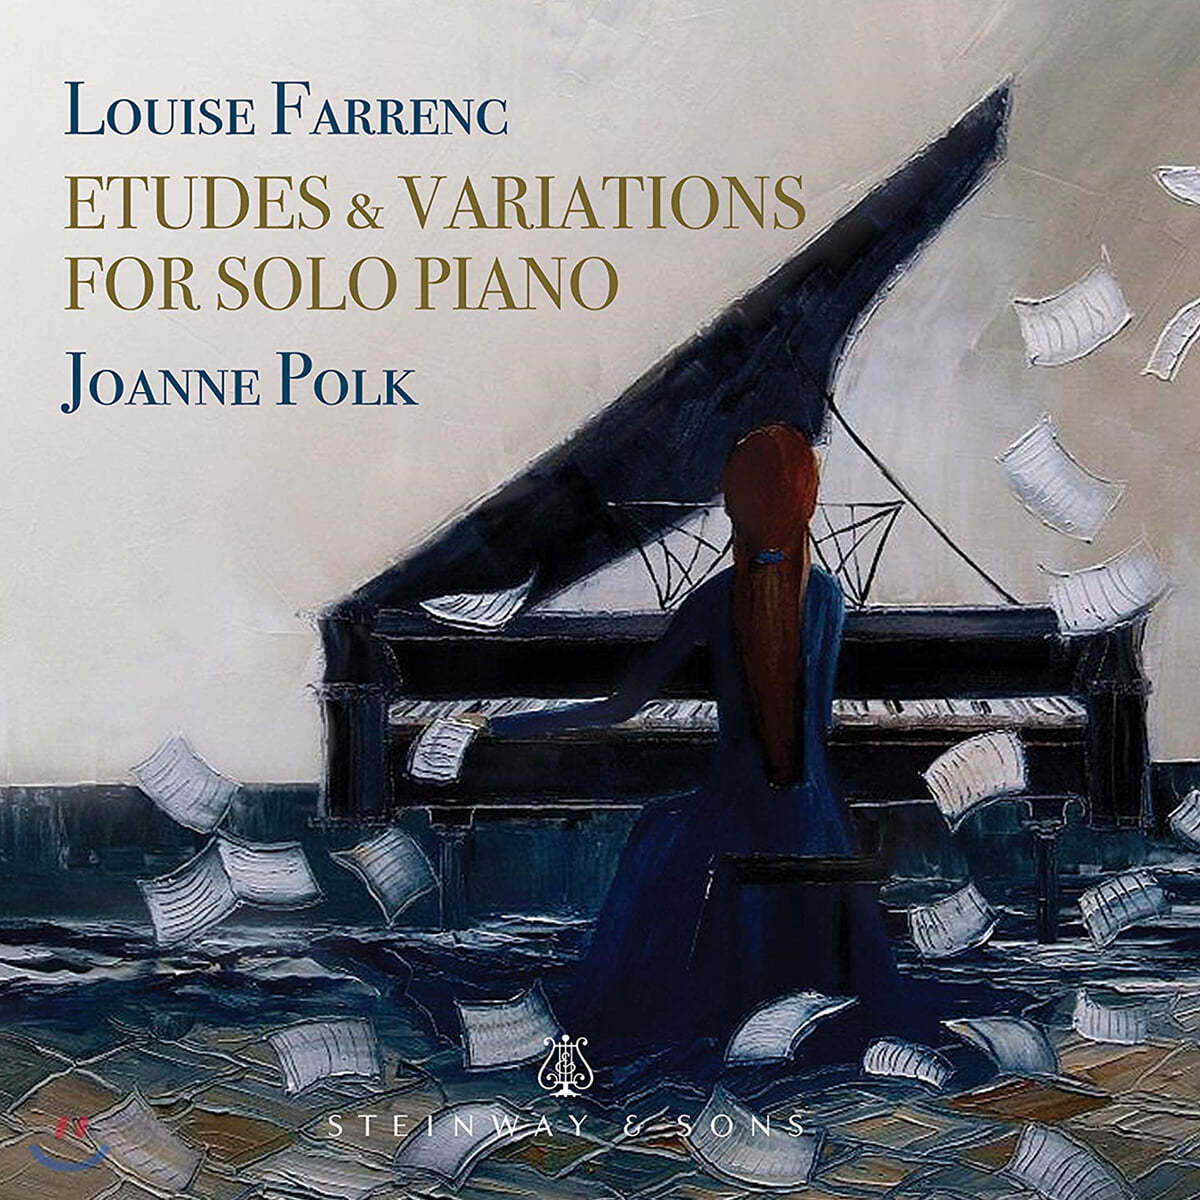 Joanne Polk 루이즈 파렝: 연습곡과 변주곡 (Louise Farrenc: Etudes and Variations for Solo Piano)